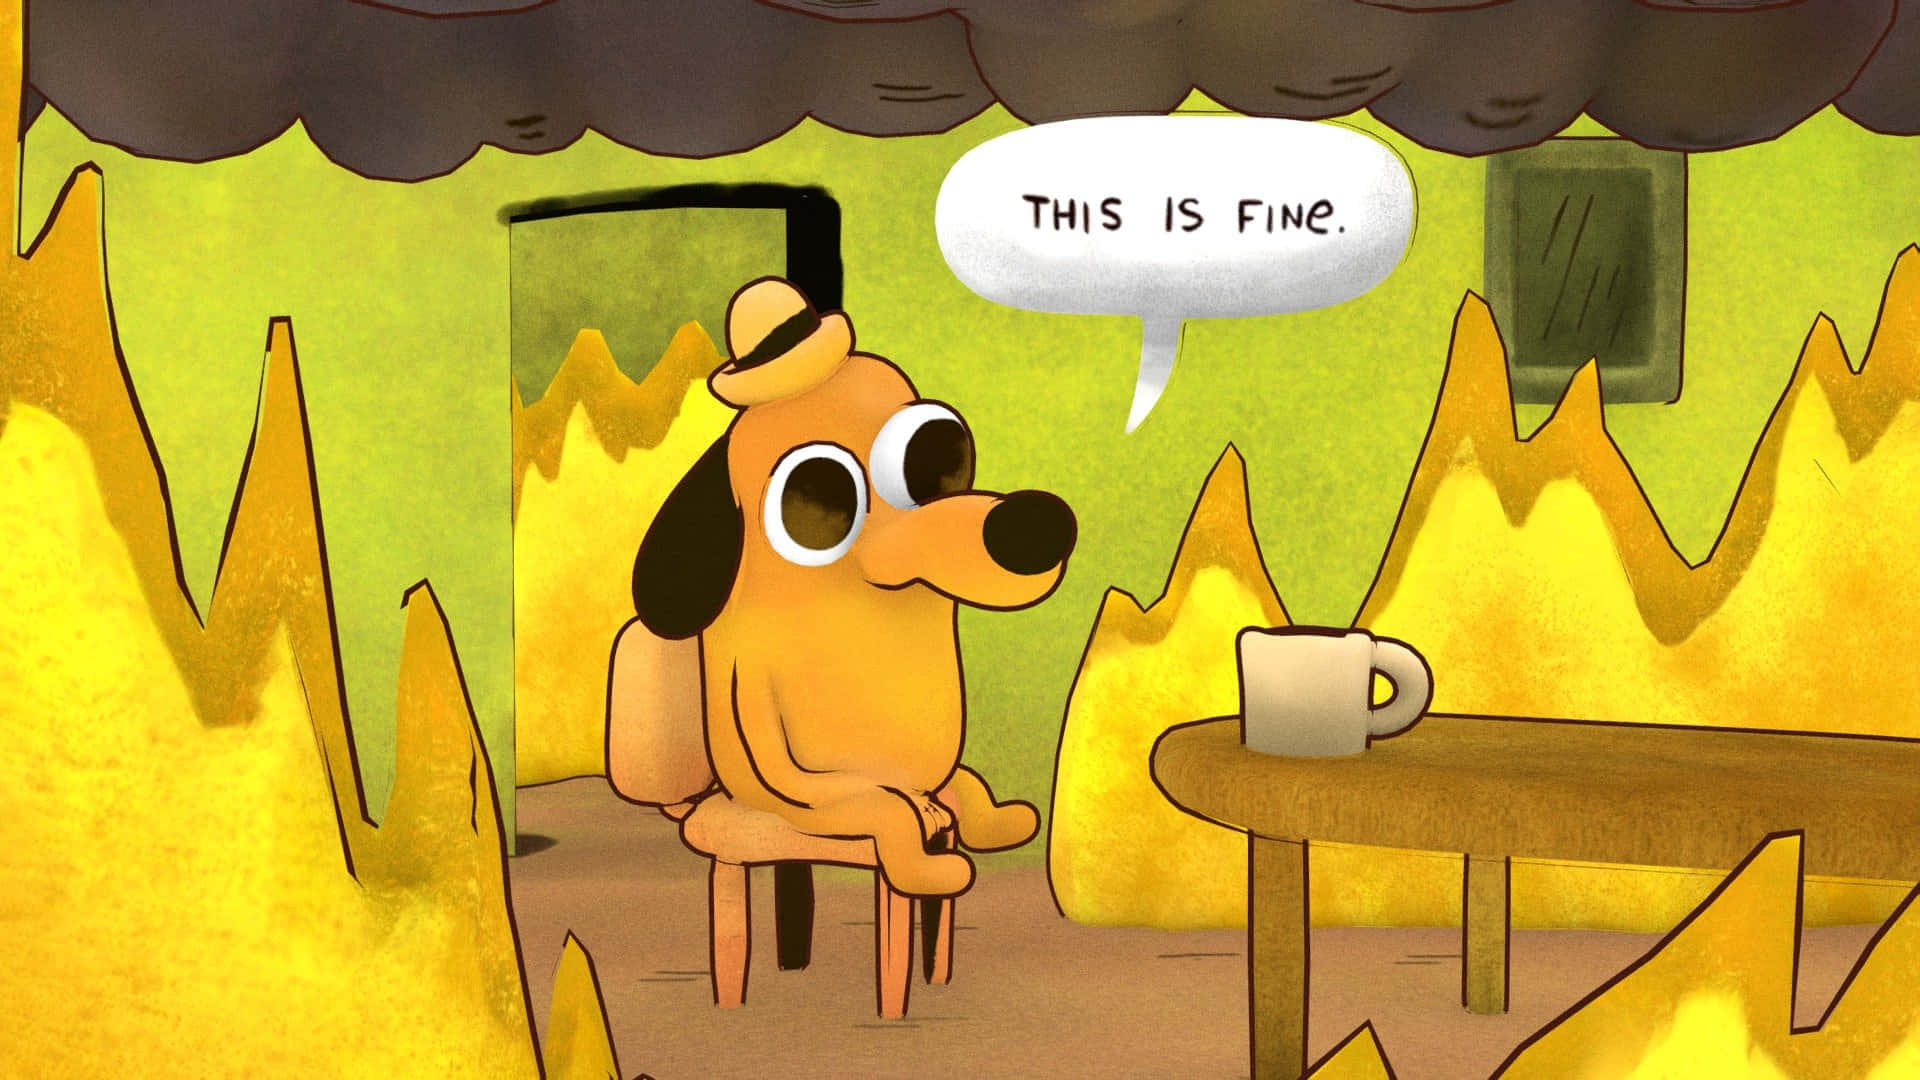 LIVELYBG - This is Fine - Video Virtual Background